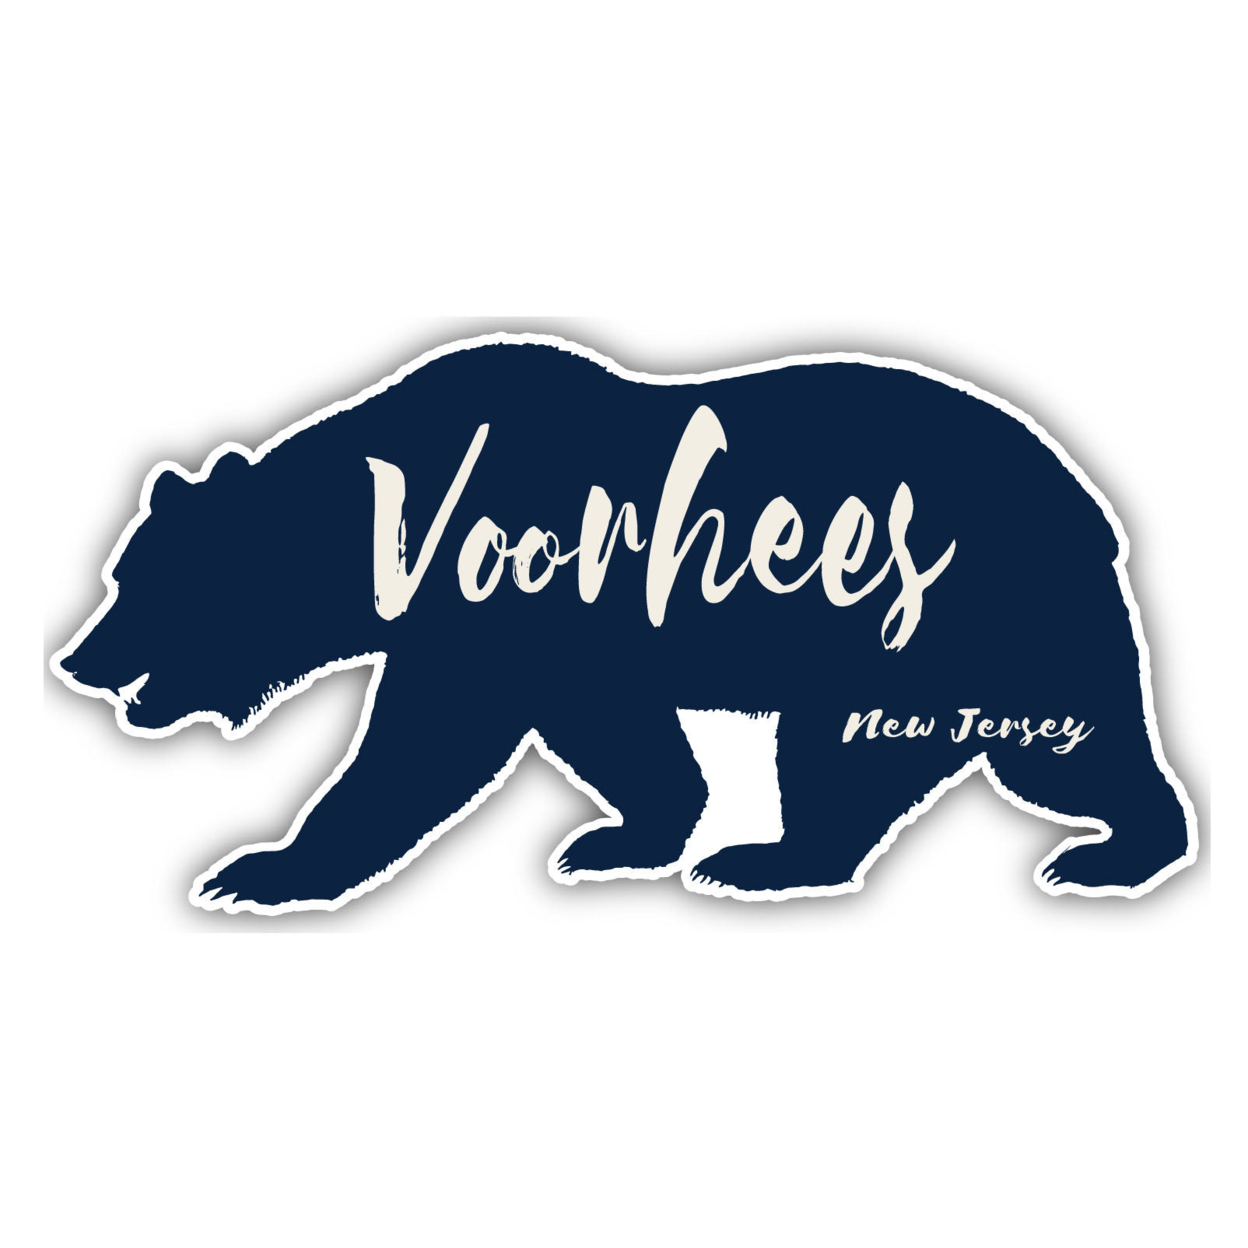 Voorhees New Jersey Souvenir Decorative Stickers (Choose Theme And Size) - Single Unit, 4-Inch, Bear